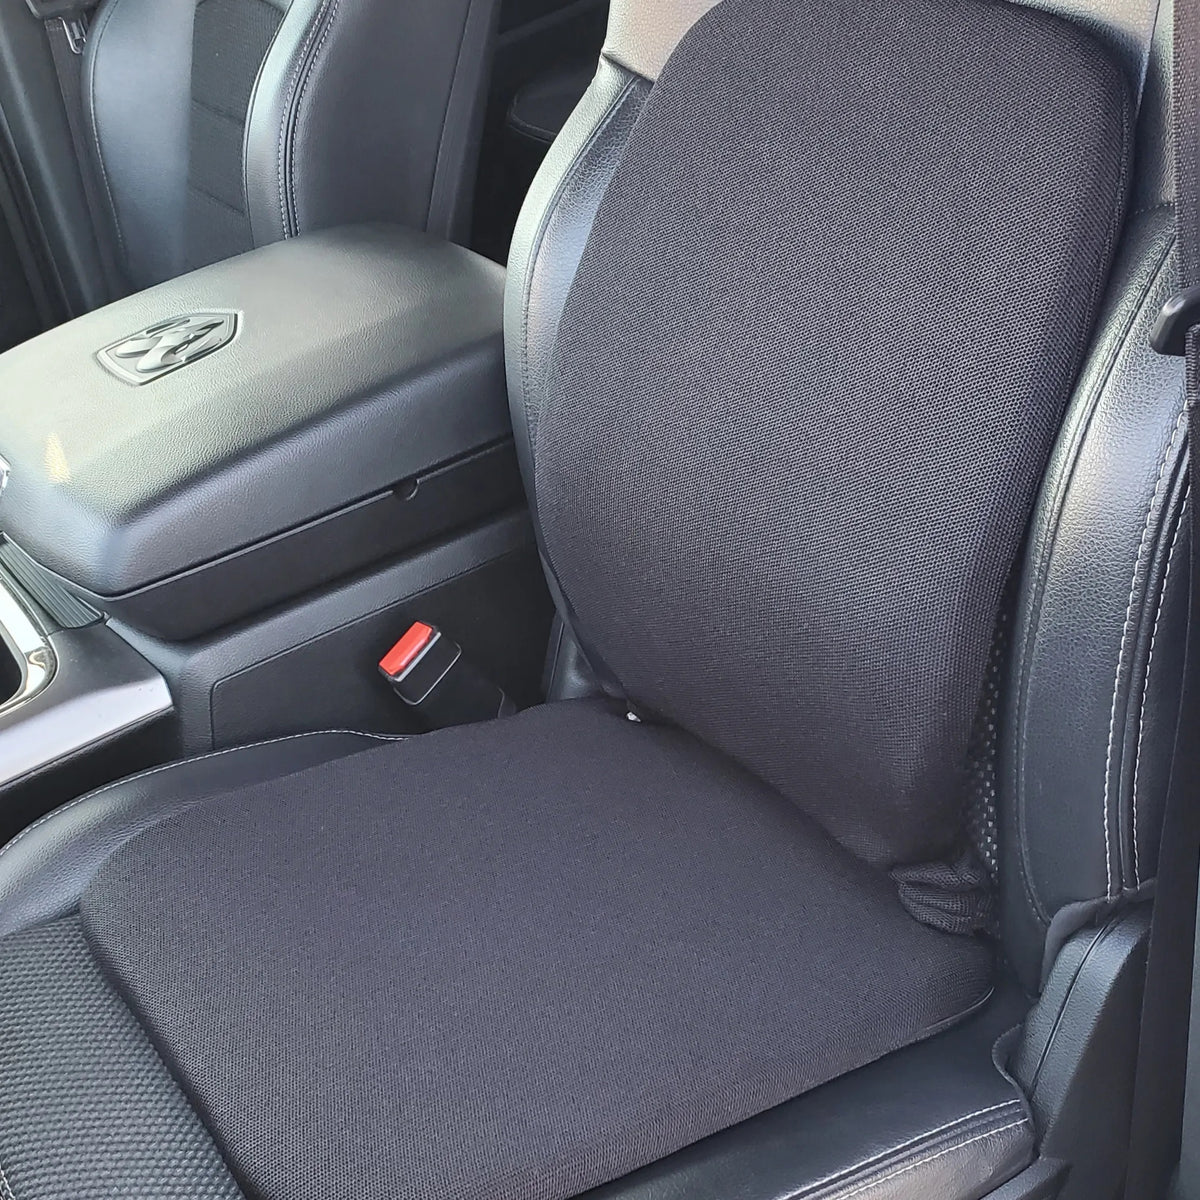 Benefits of Using Car Seat Cushions with a Contoured Design